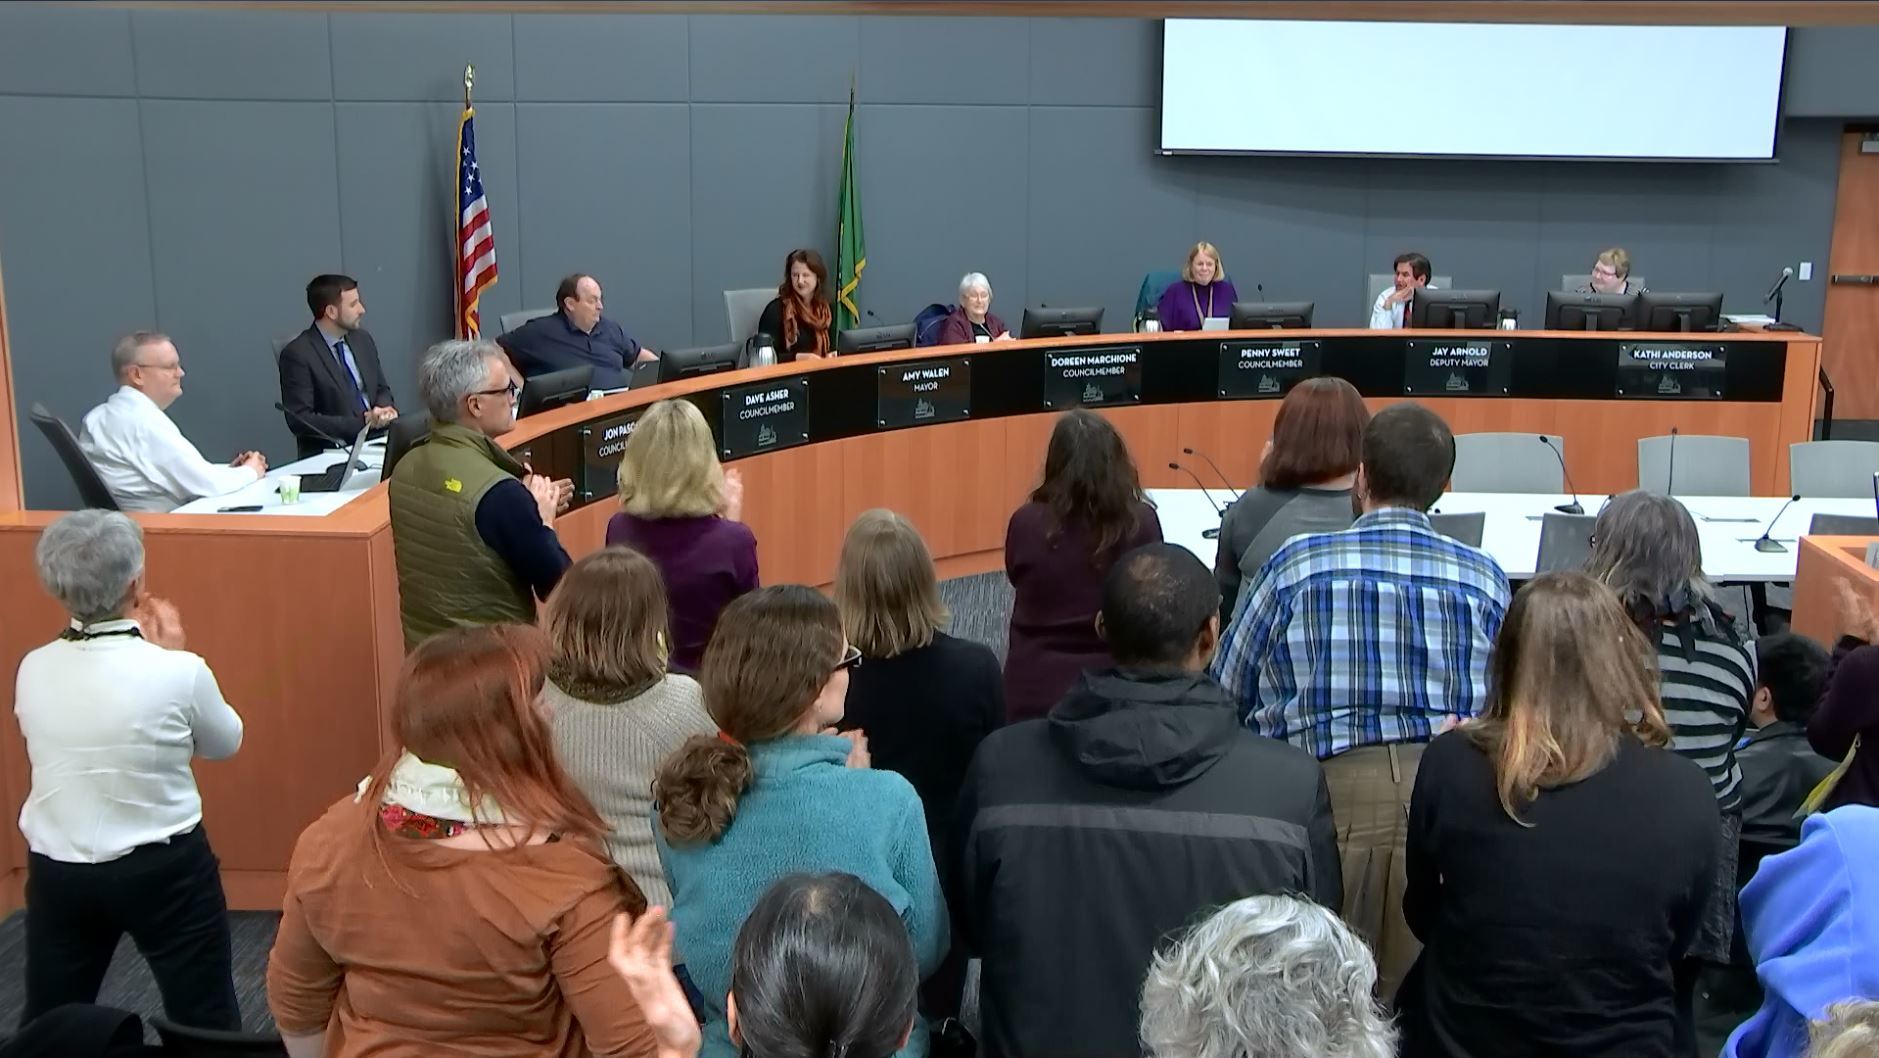 A crowd gathered at Kirkland City Hall gives a standing ovation to the Kirkland City Council for approving an ordinance and a resolution aimed at affirming the city as a safe, inclusive and welcoming place for all people. Contributed photo